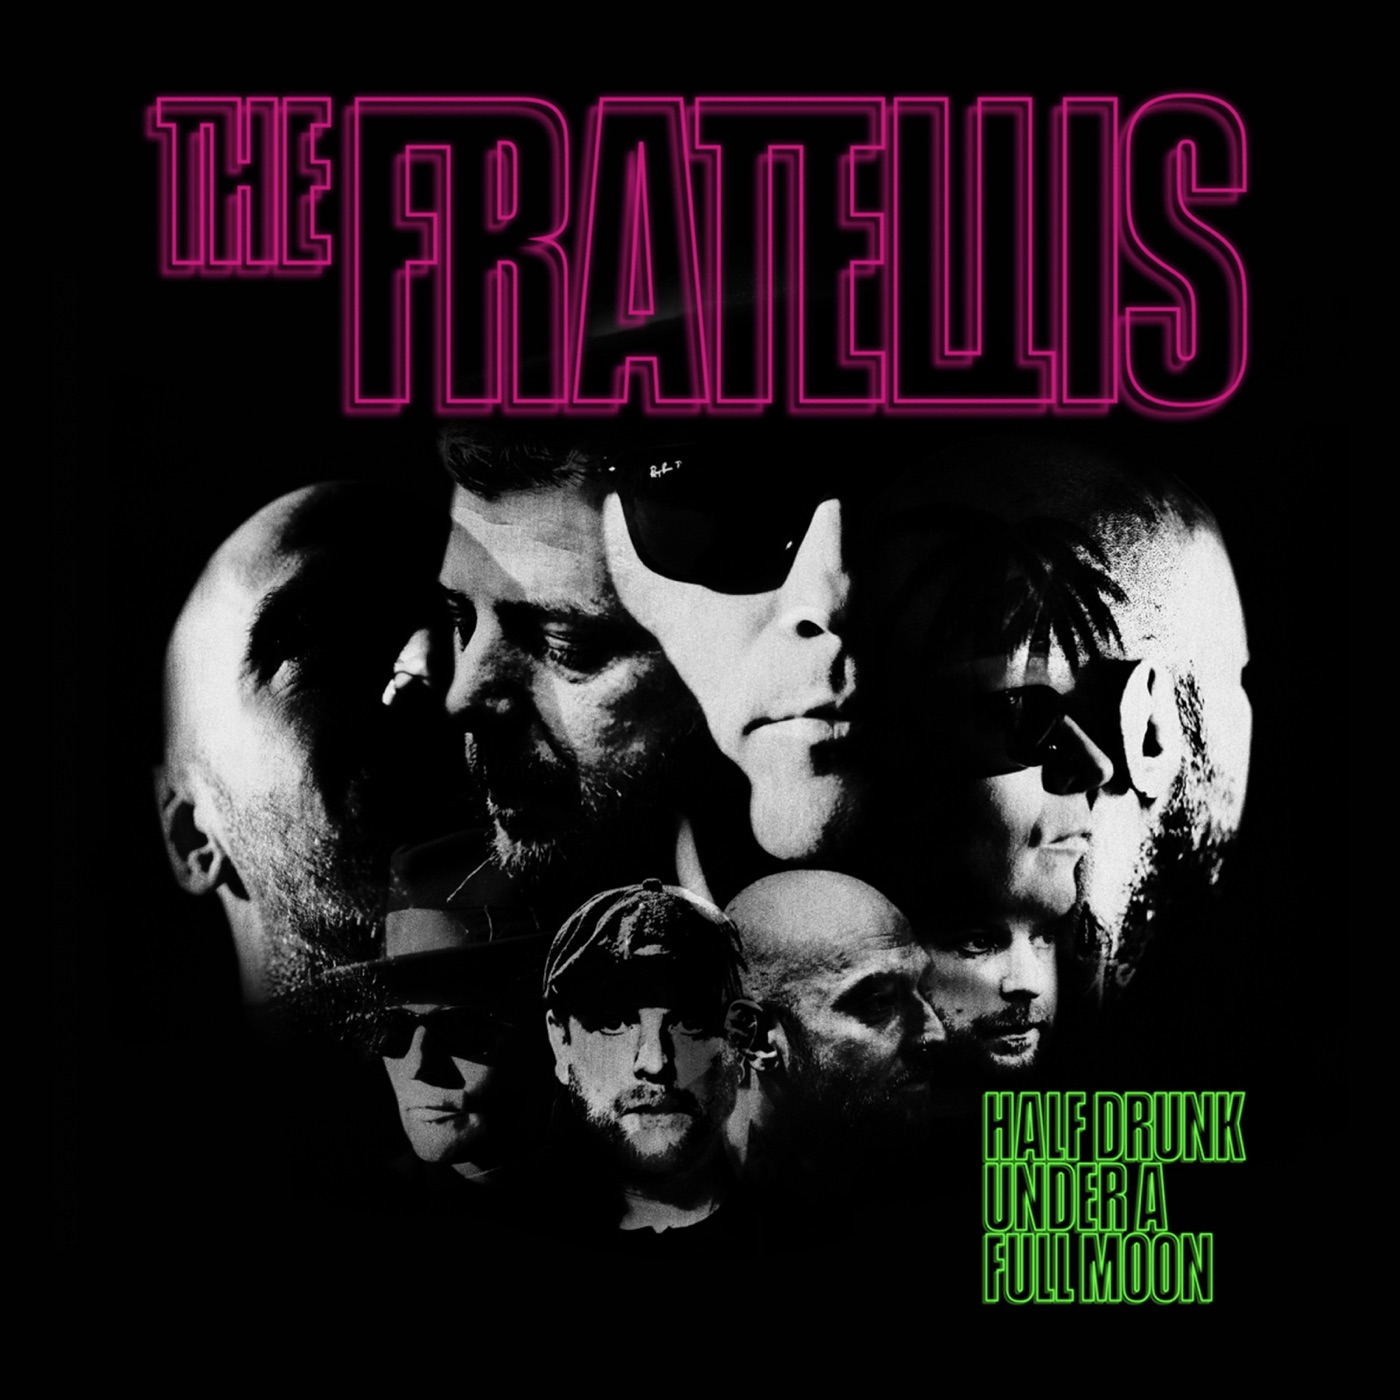 Yes Sir, I Can Boogie by The Fratellis